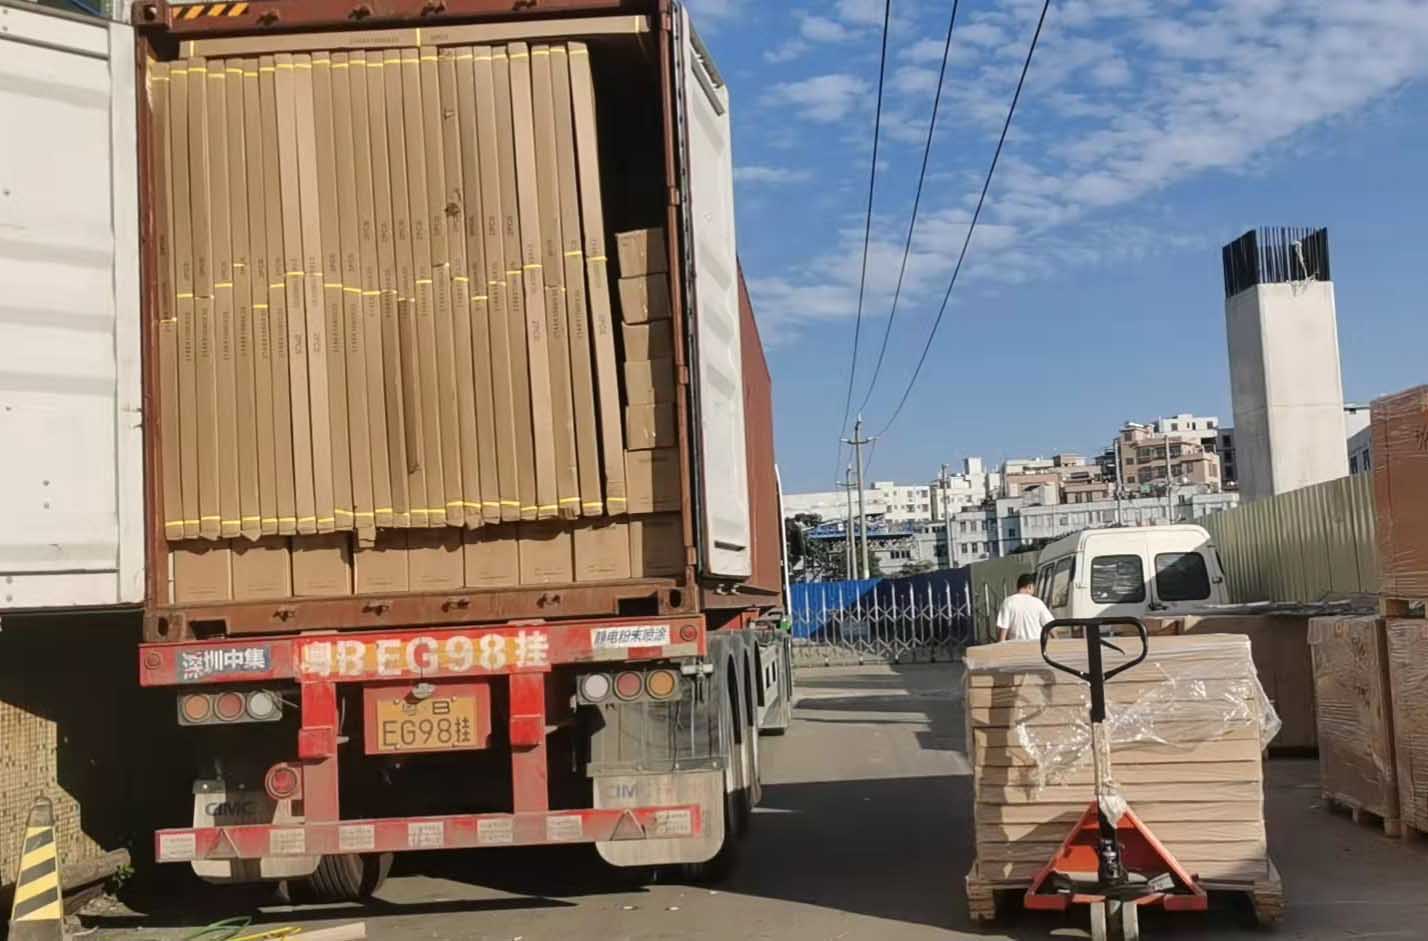 Why customer order one container solar products to Lebanon?